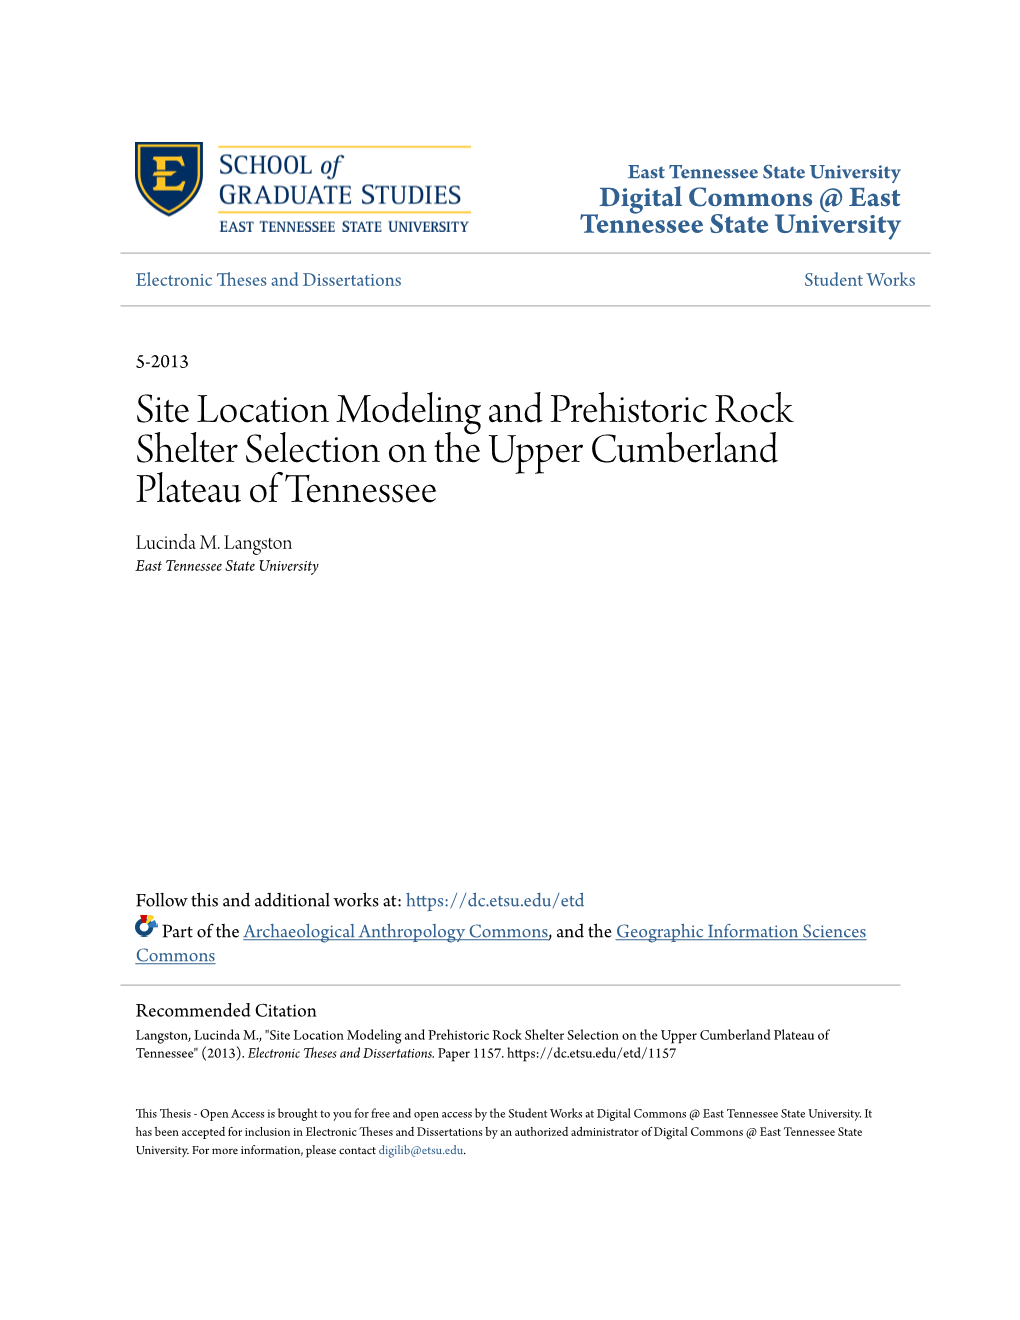 Site Location Modeling and Prehistoric Rock Shelter Selection on the Upper Cumberland Plateau of Tennessee Lucinda M